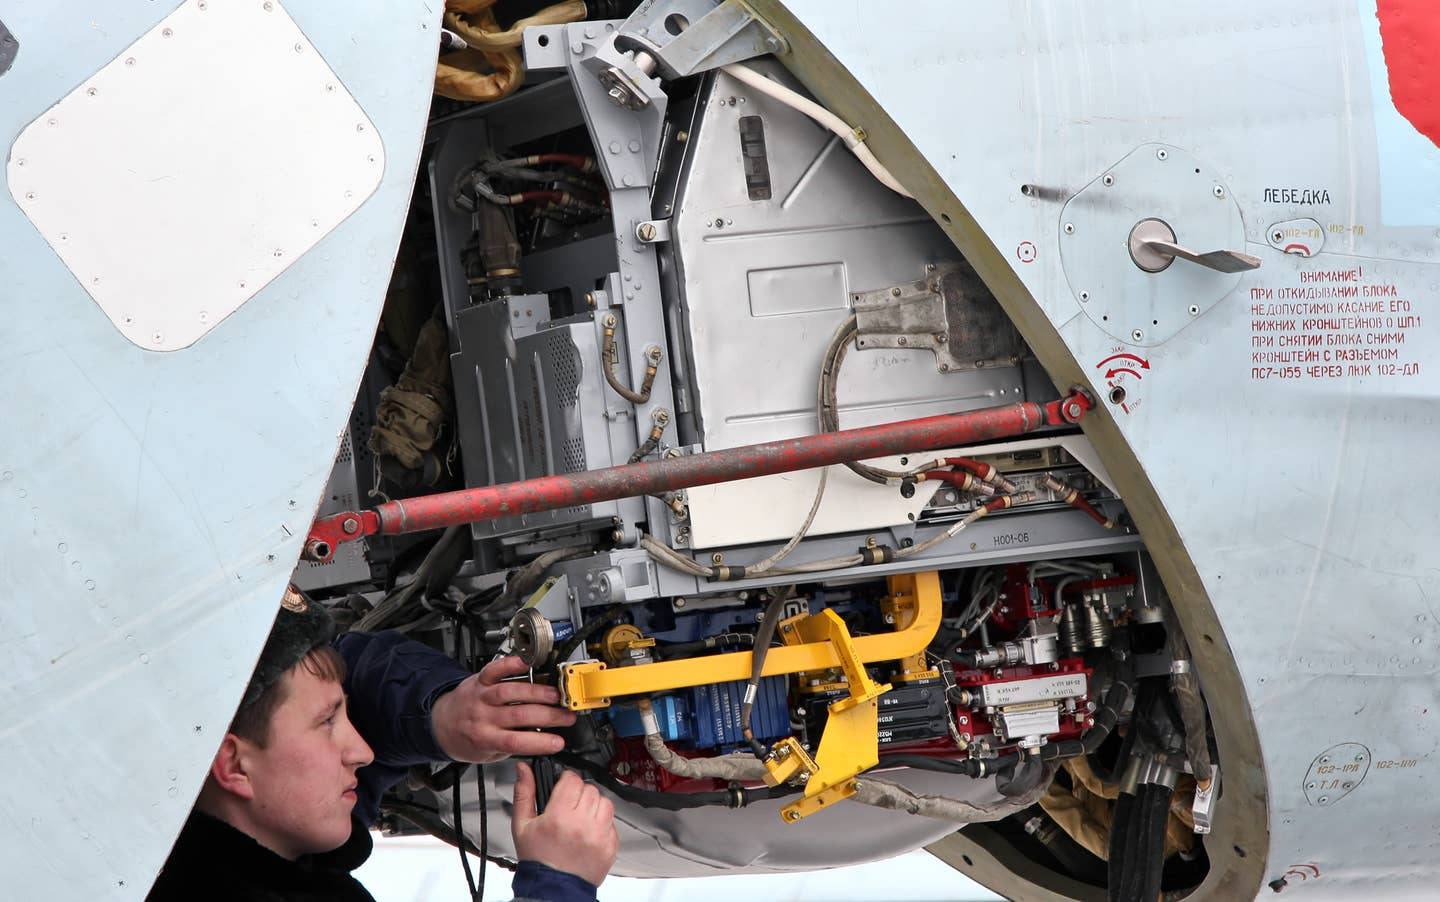 A maintainer works on the radar of a Su-27SM at Khotilovo Airbase in 2011. <em>Vitaly V. Kuzmin/Wikimedia Commons</em>